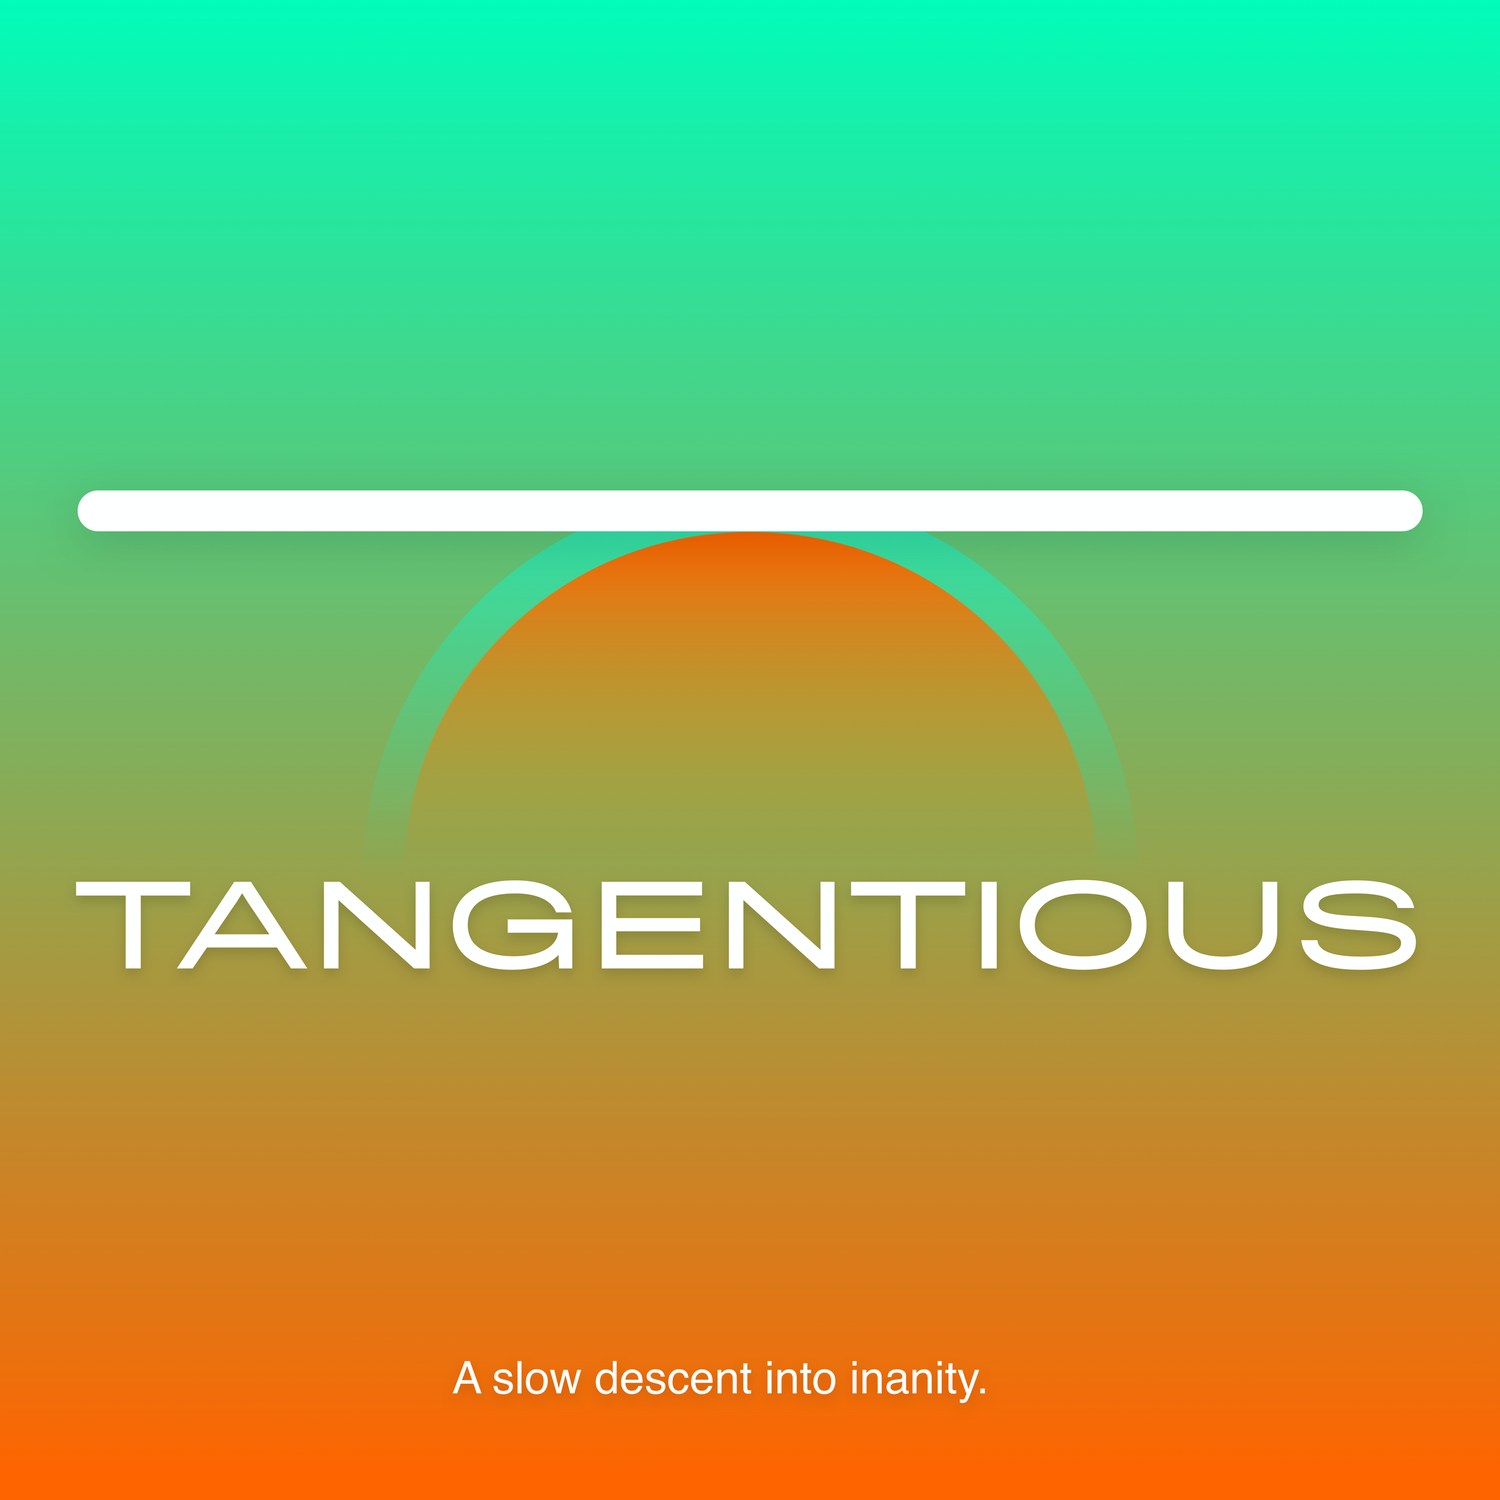 Tangentious